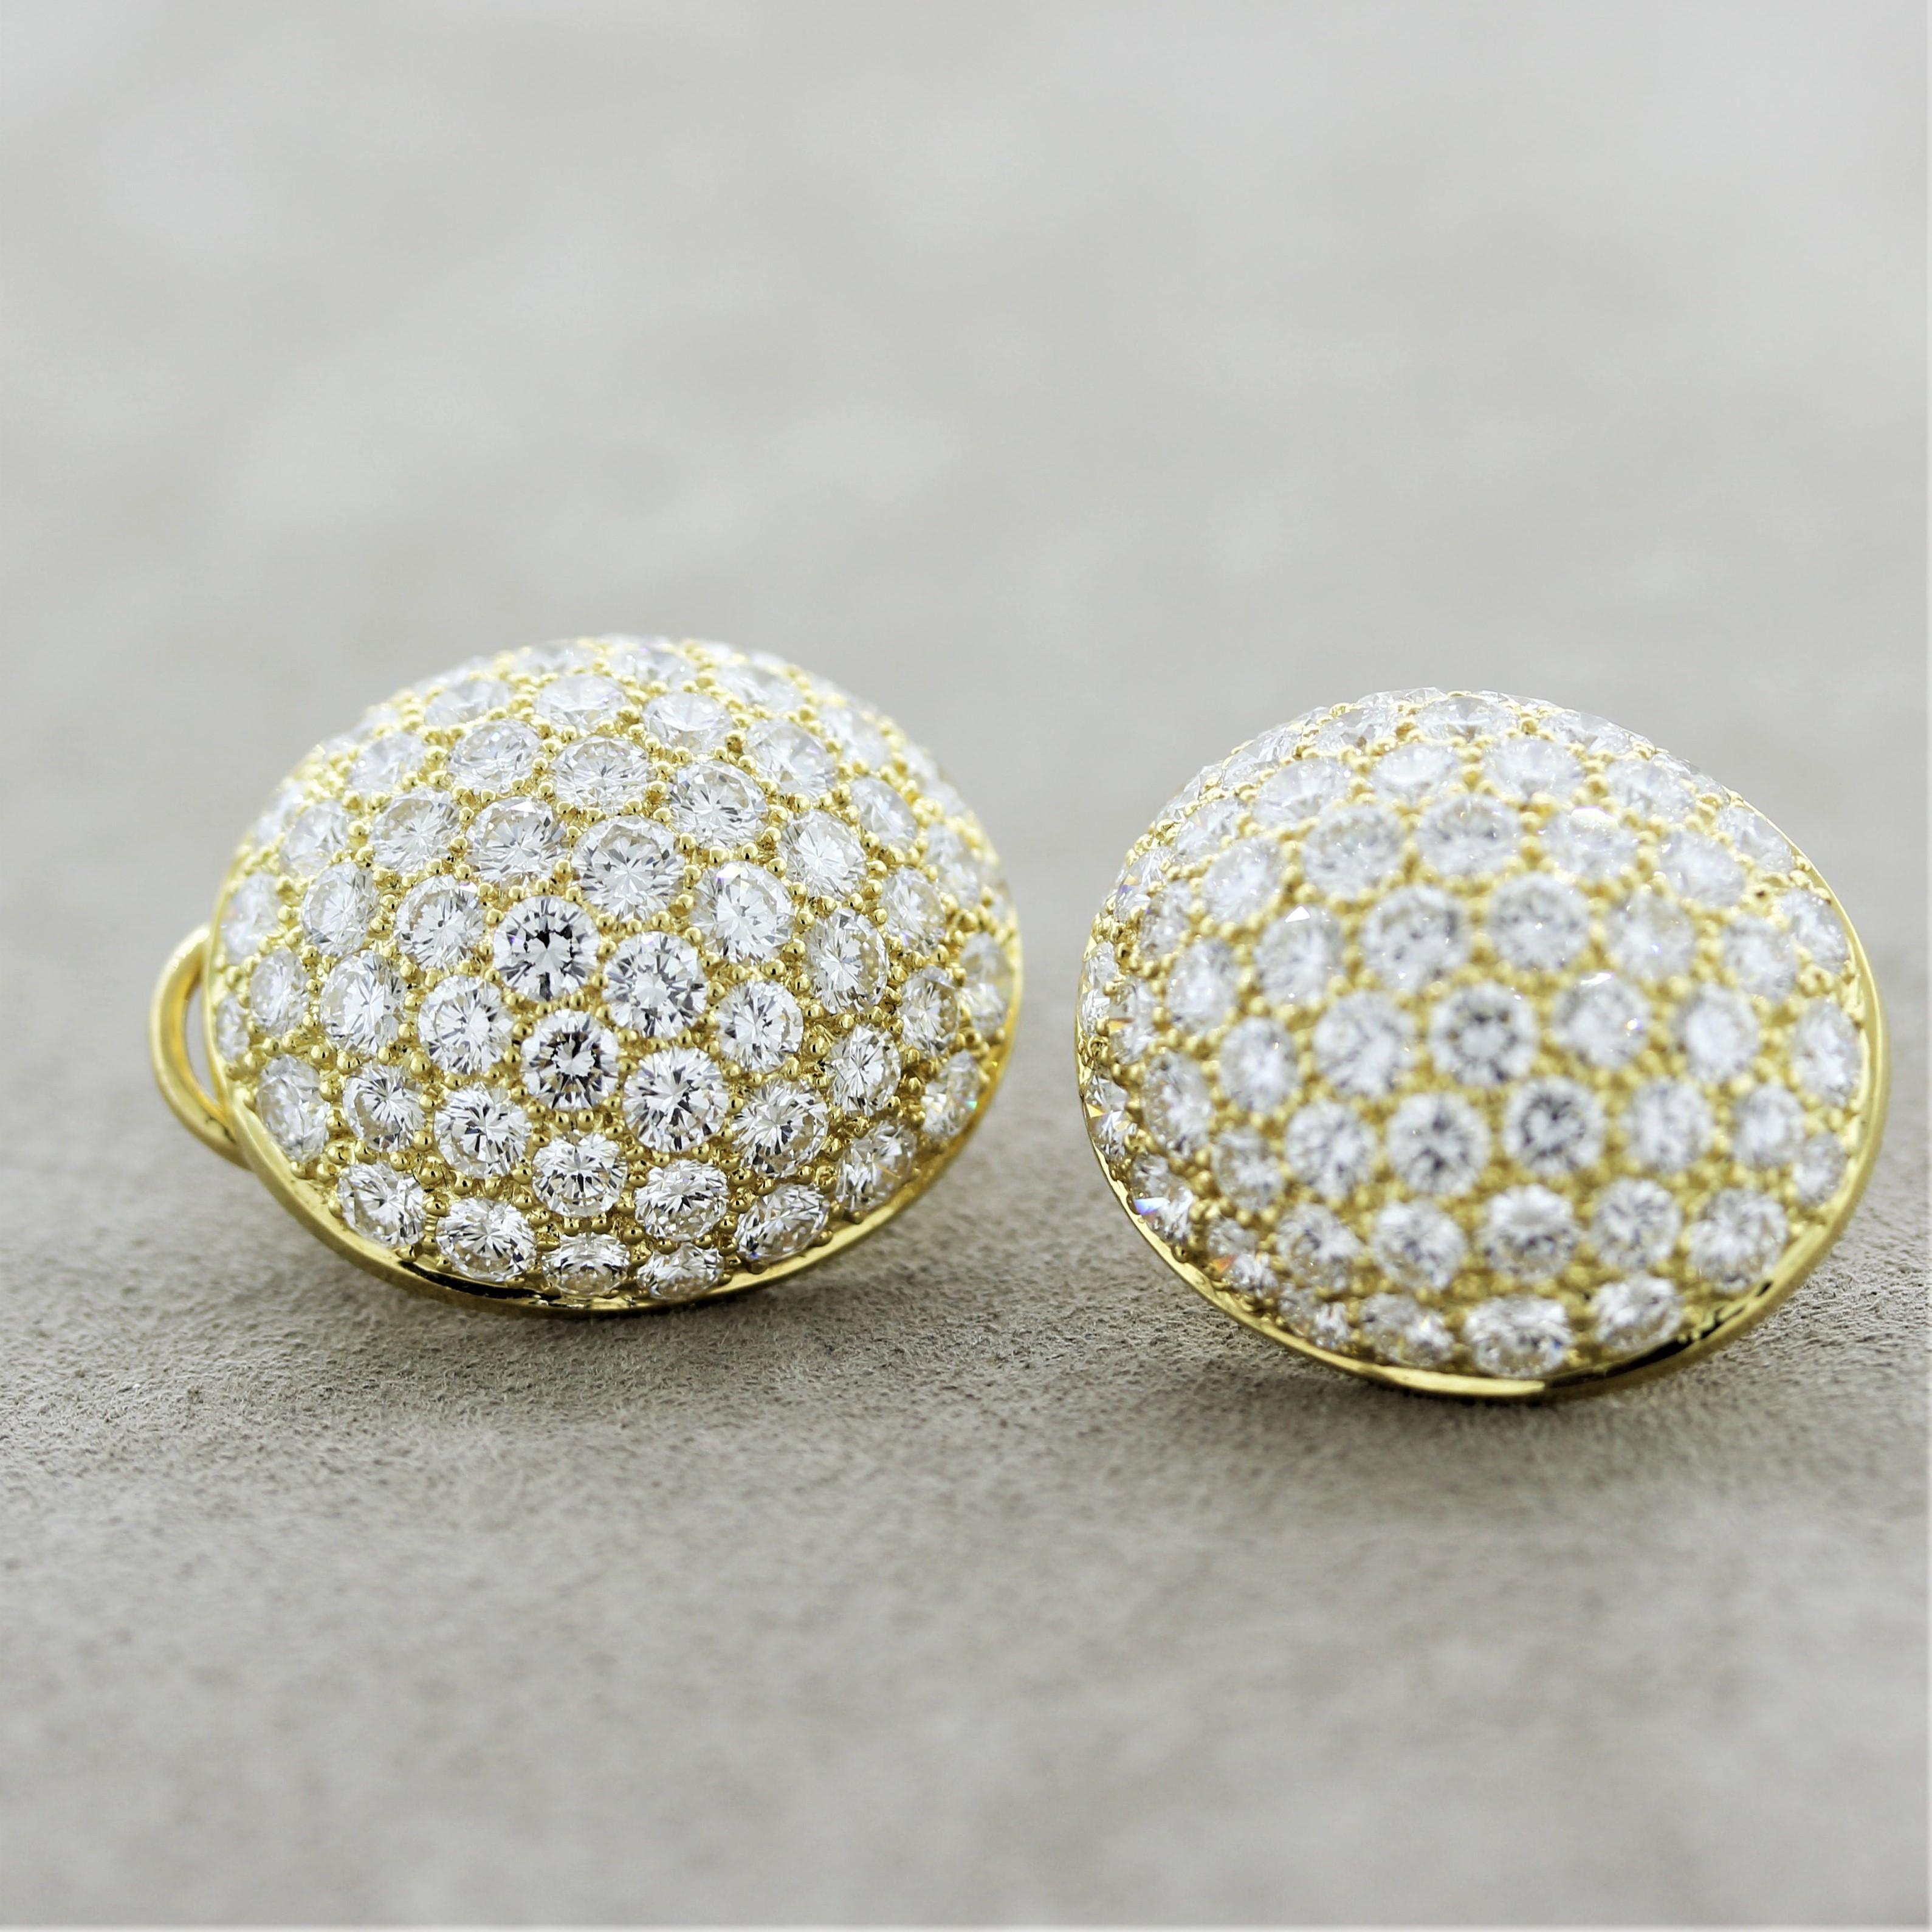 An original piece from Hammerman, this substantial pair of earrings feature 14 carats of fine top quality round brilliant-cut diamonds. They are cluster-set and have excellent brilliance and sparkle. Made in 18k yellow gold, a quality and special